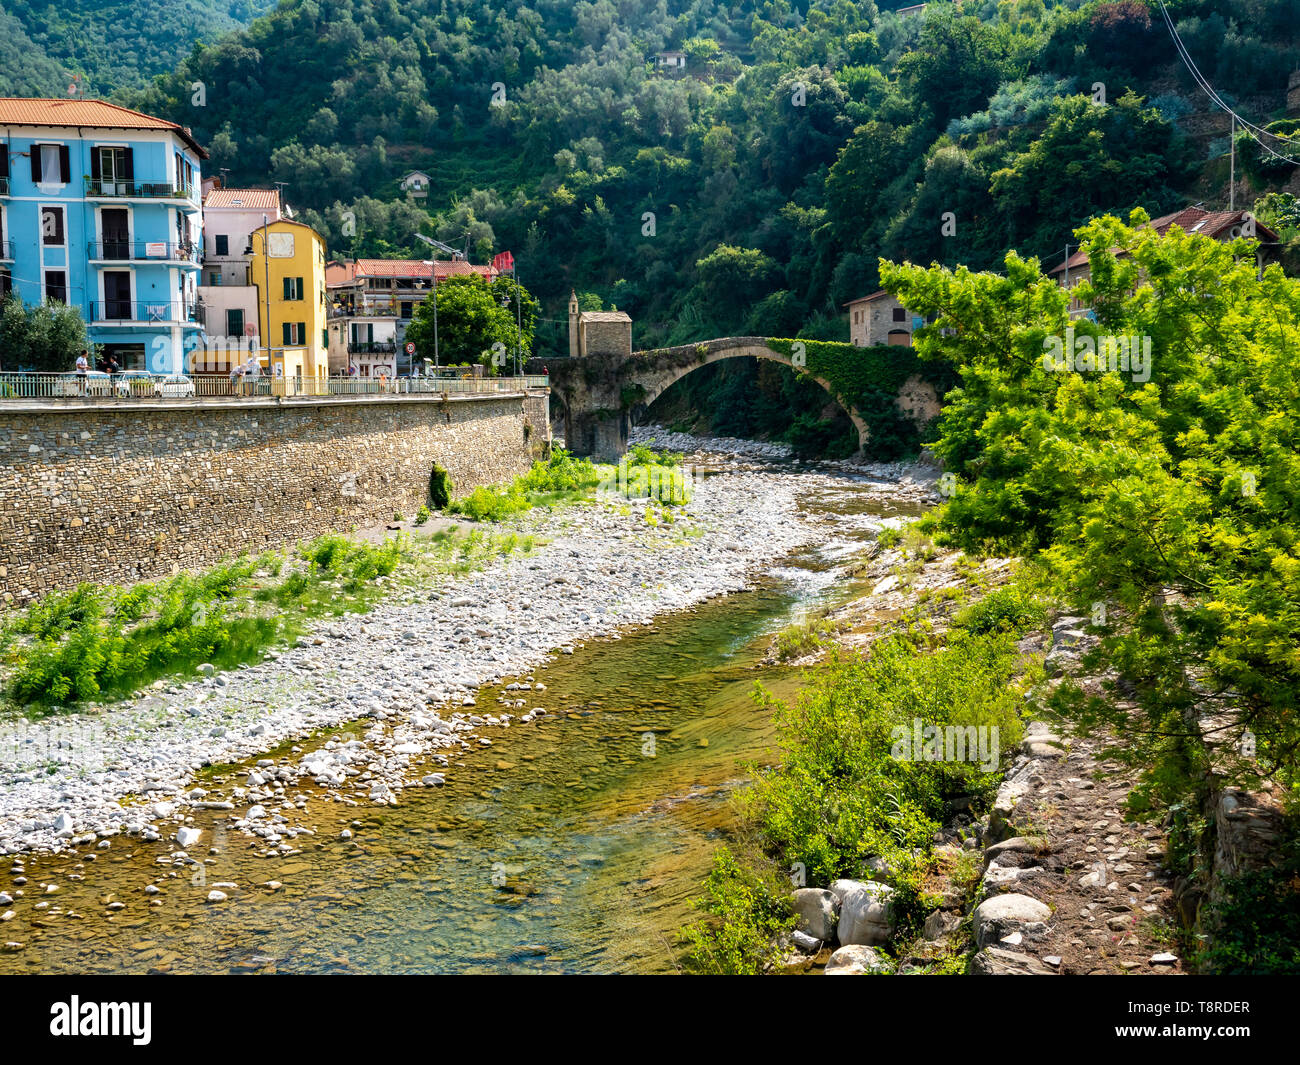 view of the small village of Badalucco Liguria, Italy in summer Stock Photo